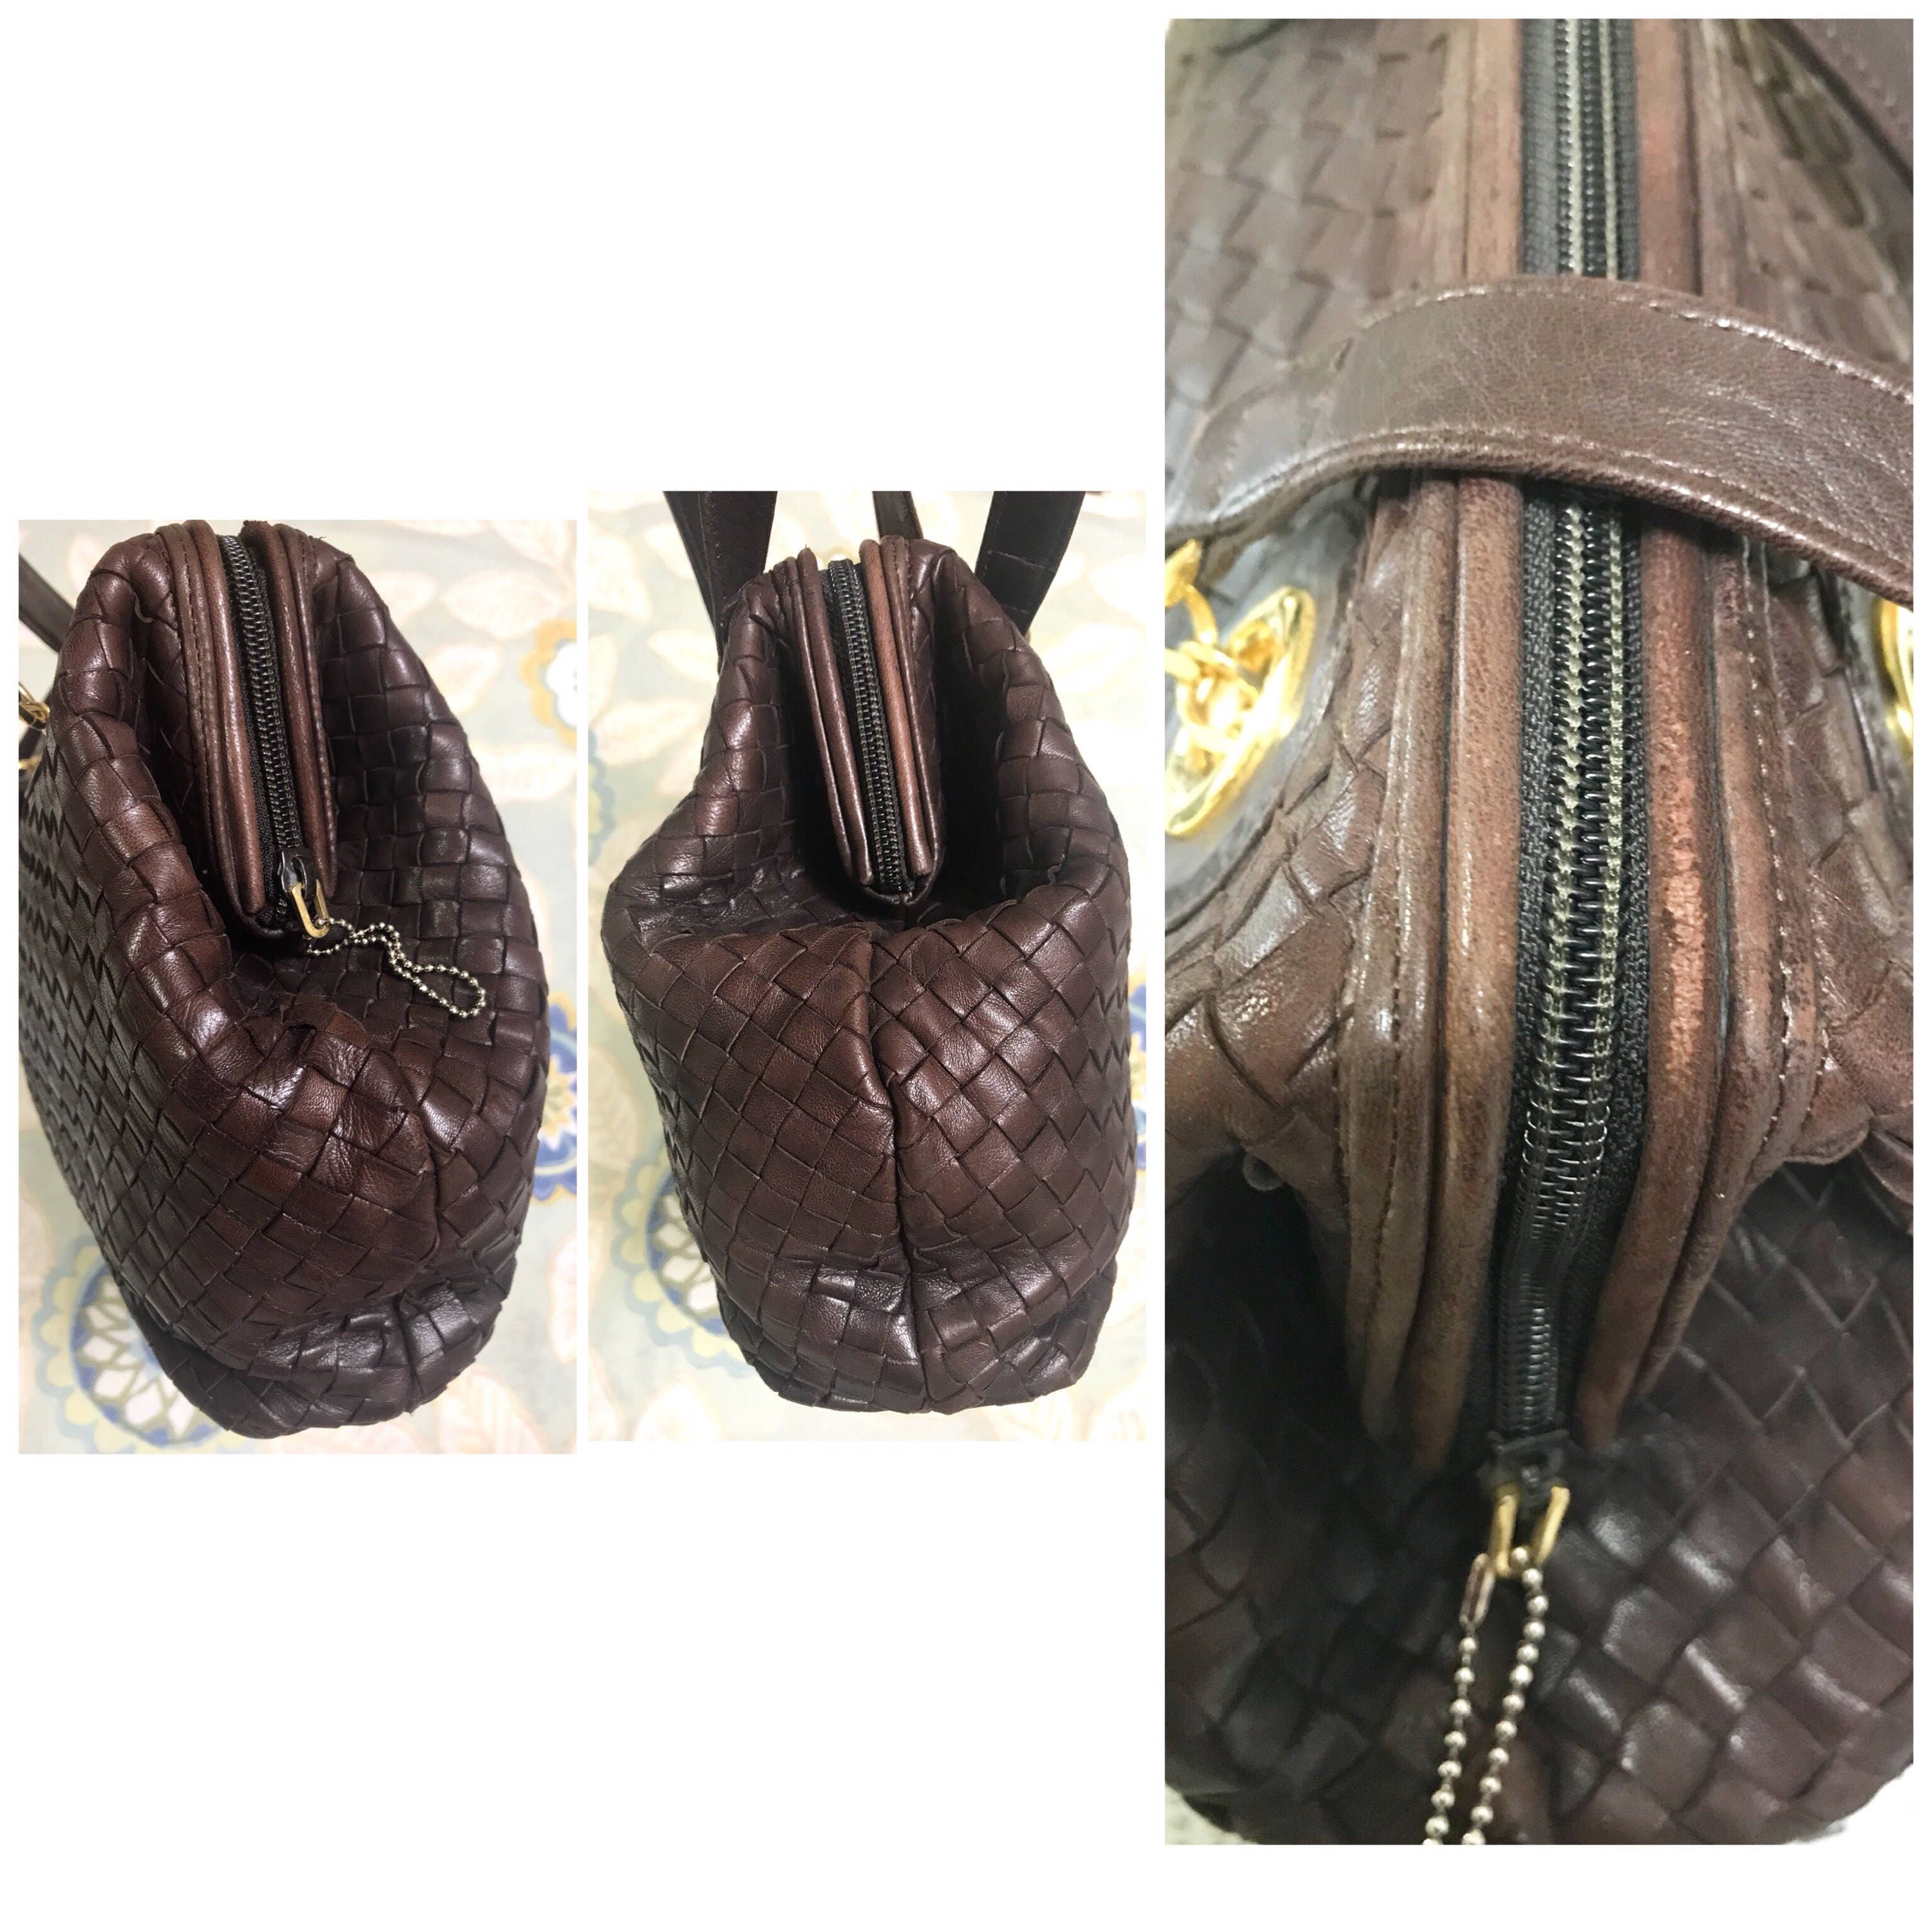 Vintage Bally dark brown lamb leather woven, intrecciato style shoulder bag  with golden B logo motif. Classic purse.